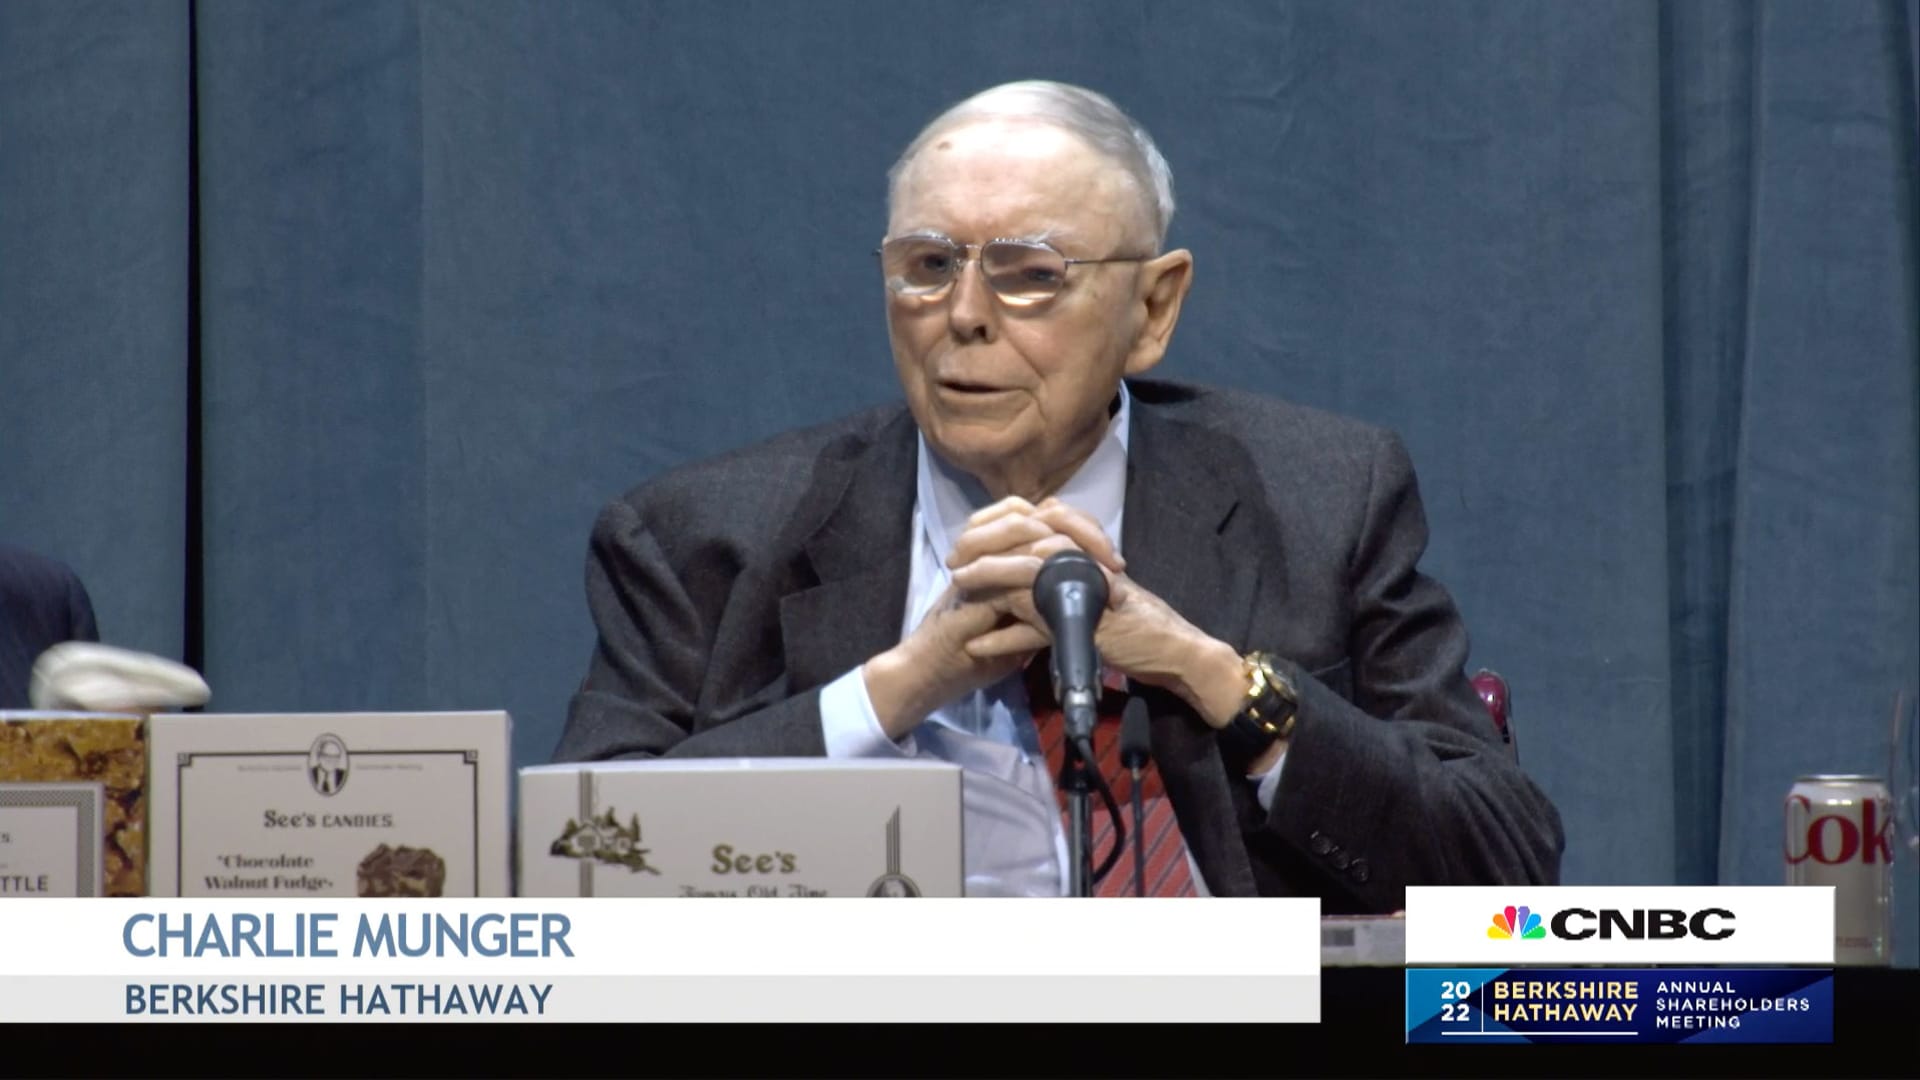 A ‘true master of investing:’ Top value investor on how Charlie Munger changed the craft